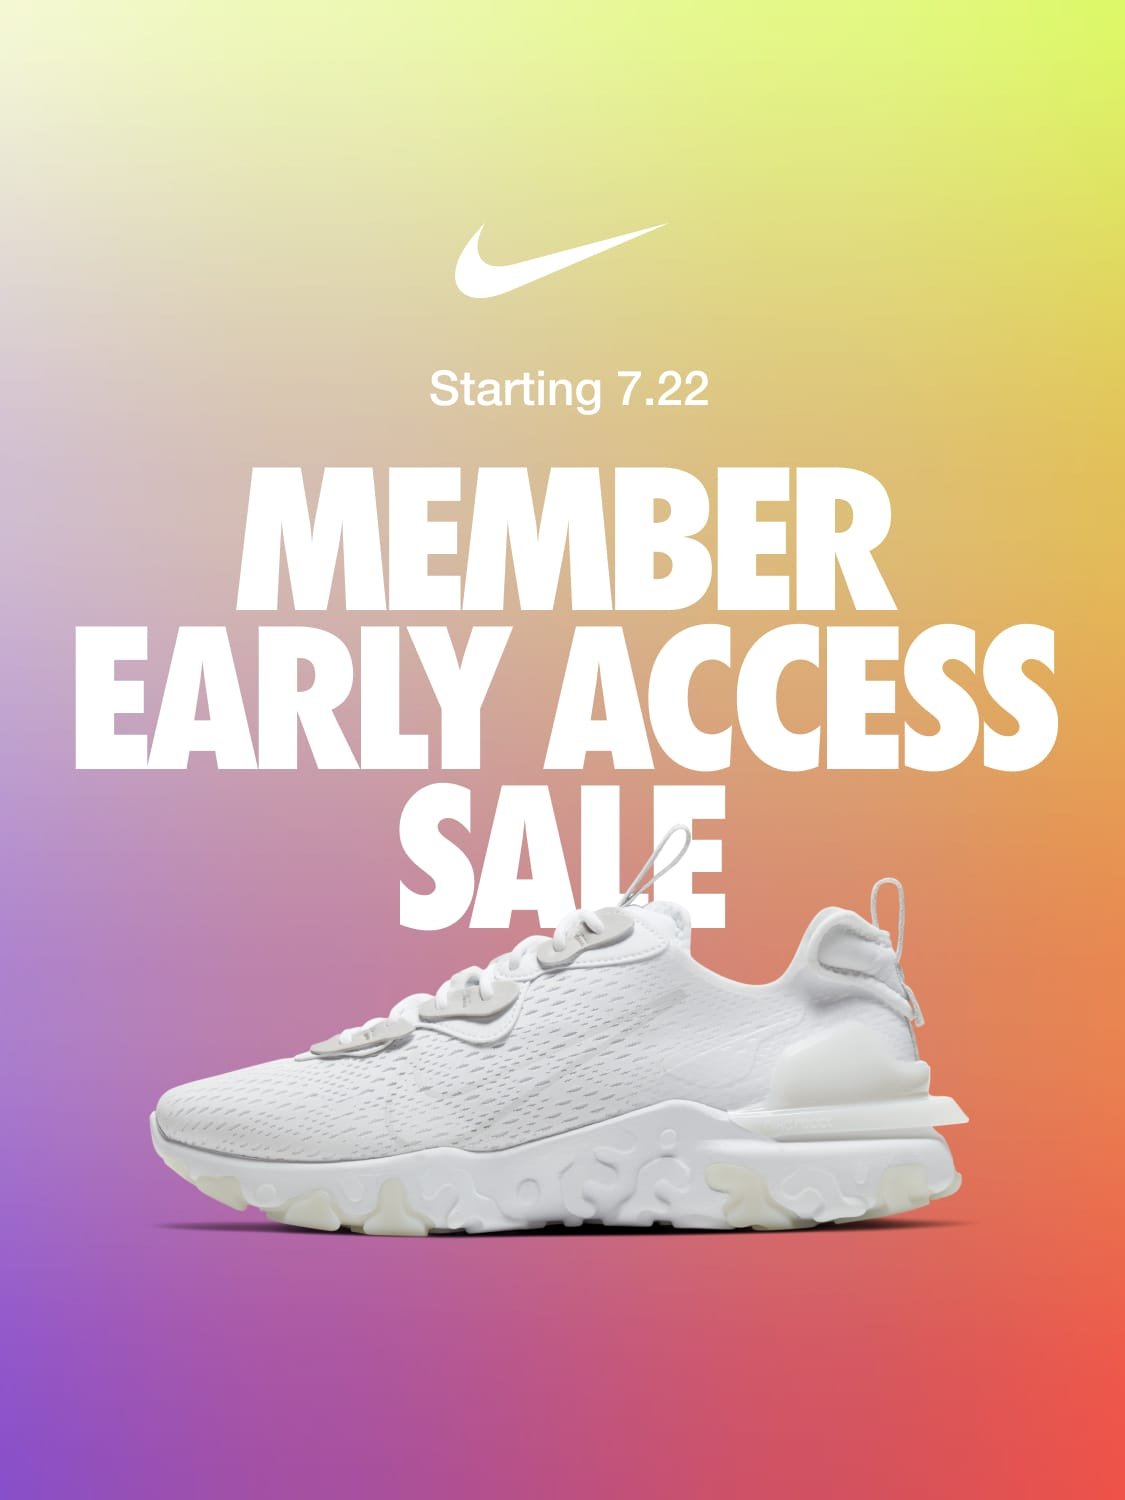 how do you get early access on snkrs